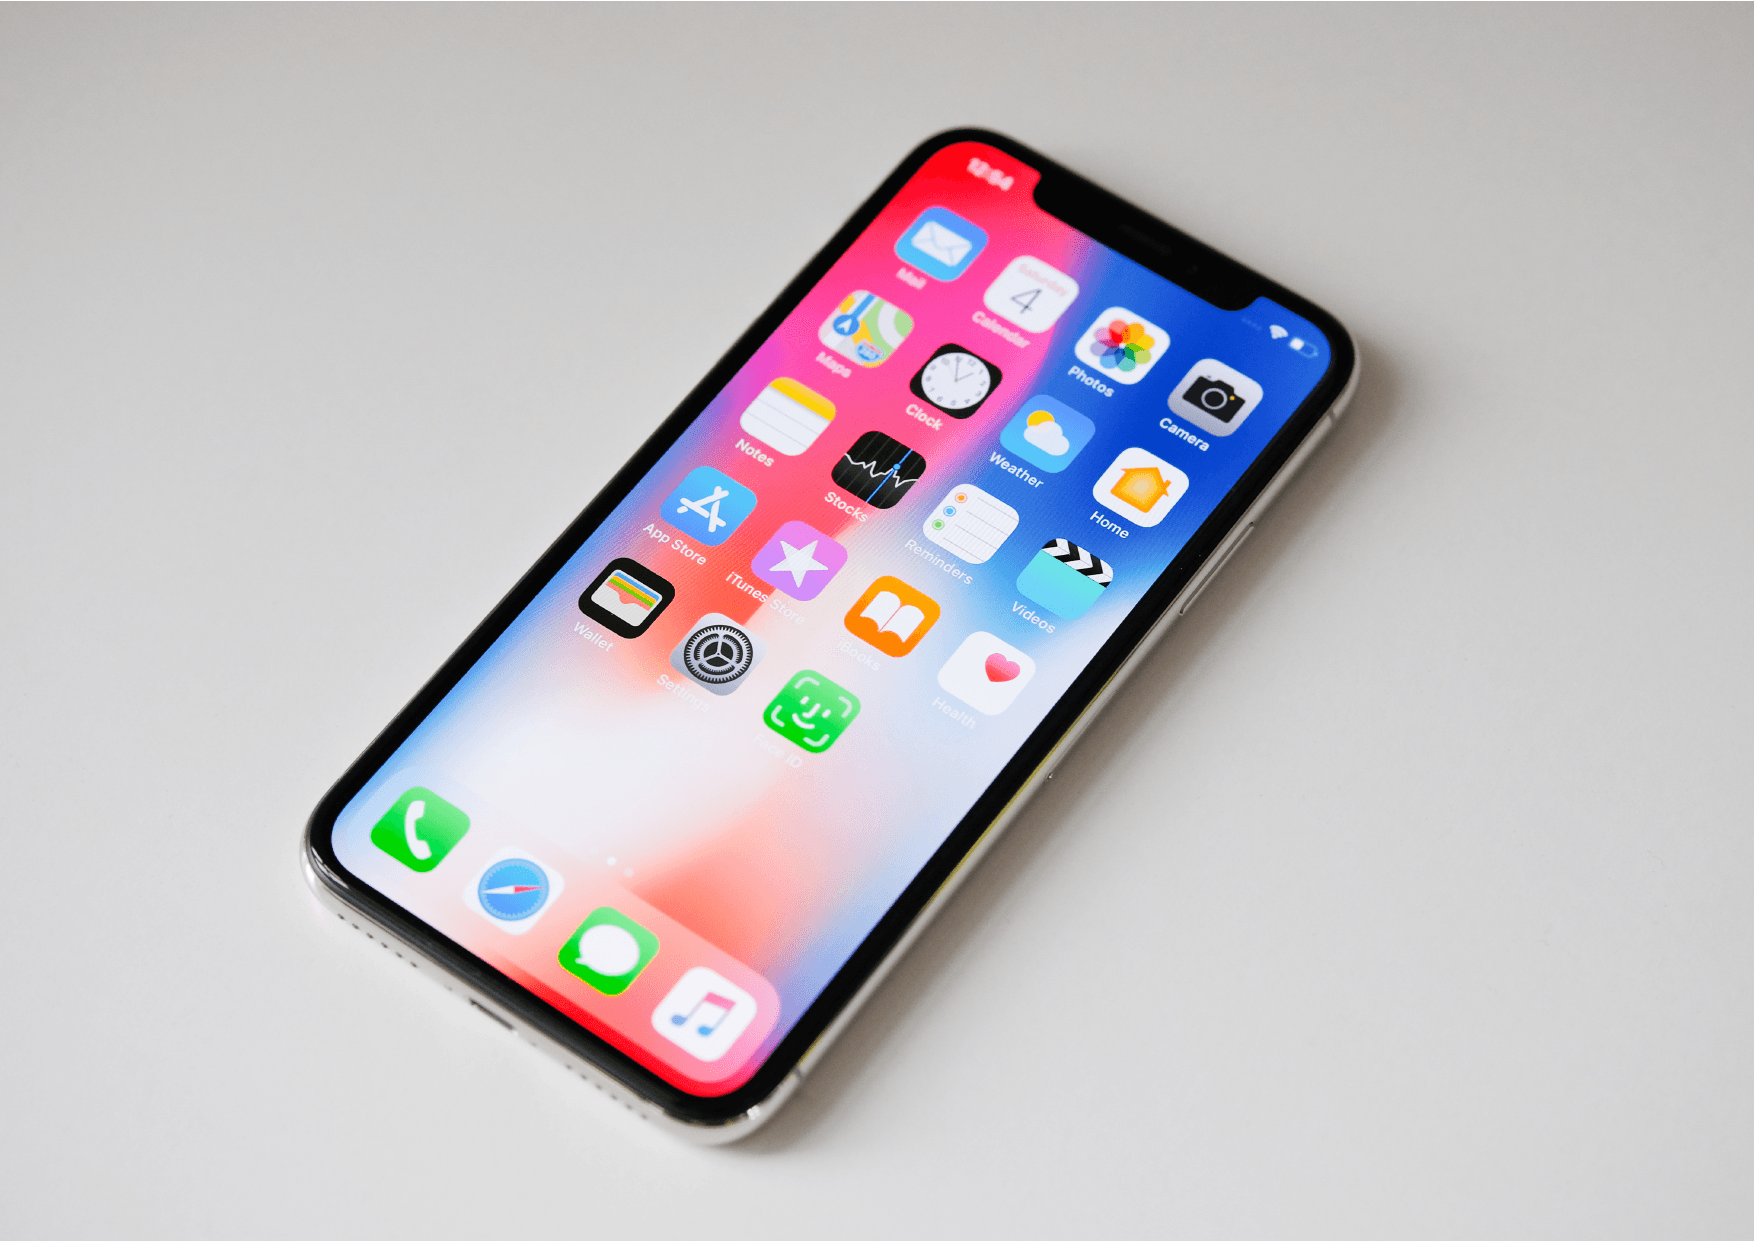 Optimizing your app UI for iPhone X